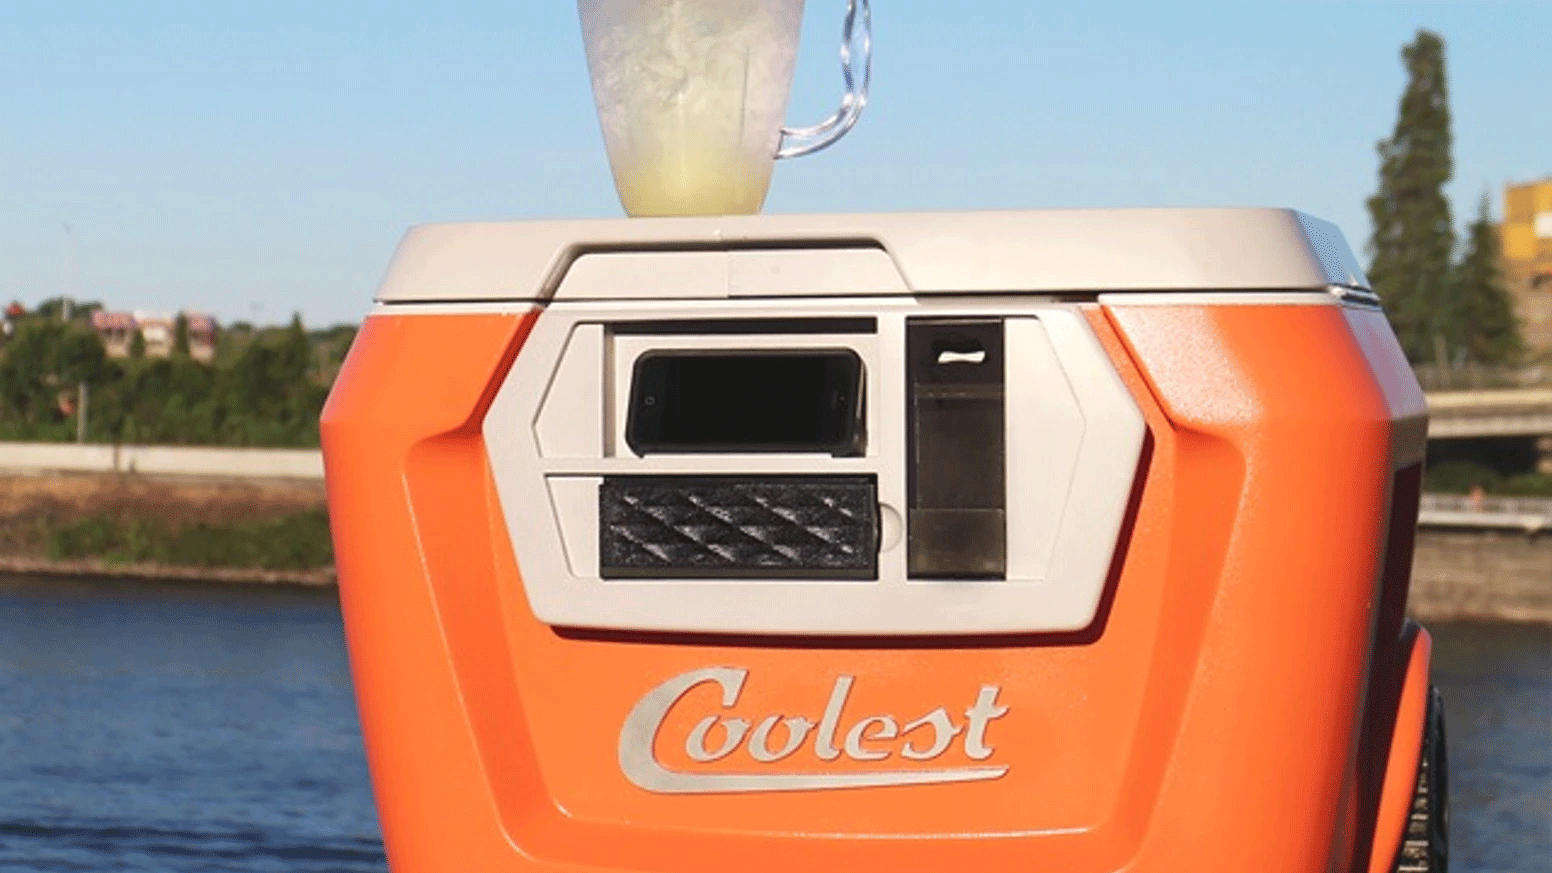 Coolest Cooler example 1